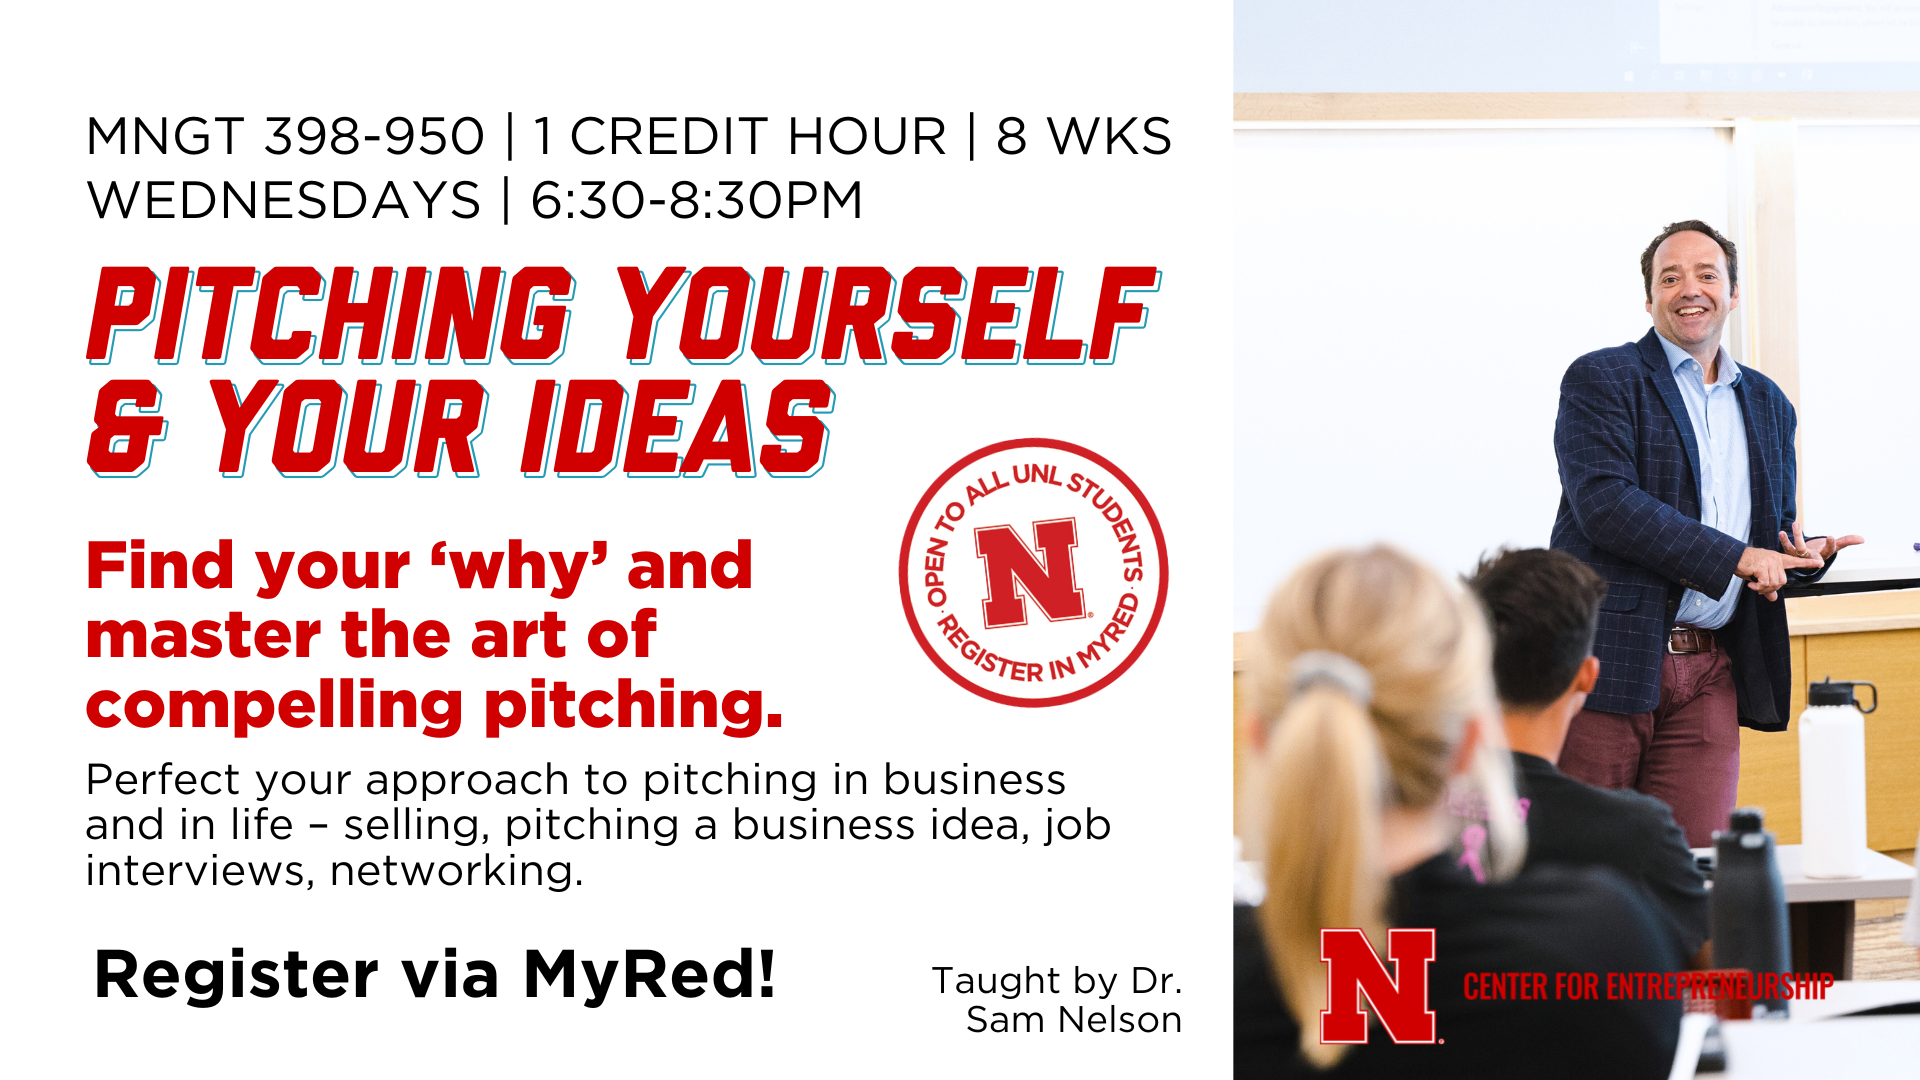 MNGT 390-980 Pitching Yourself and Your Ideas